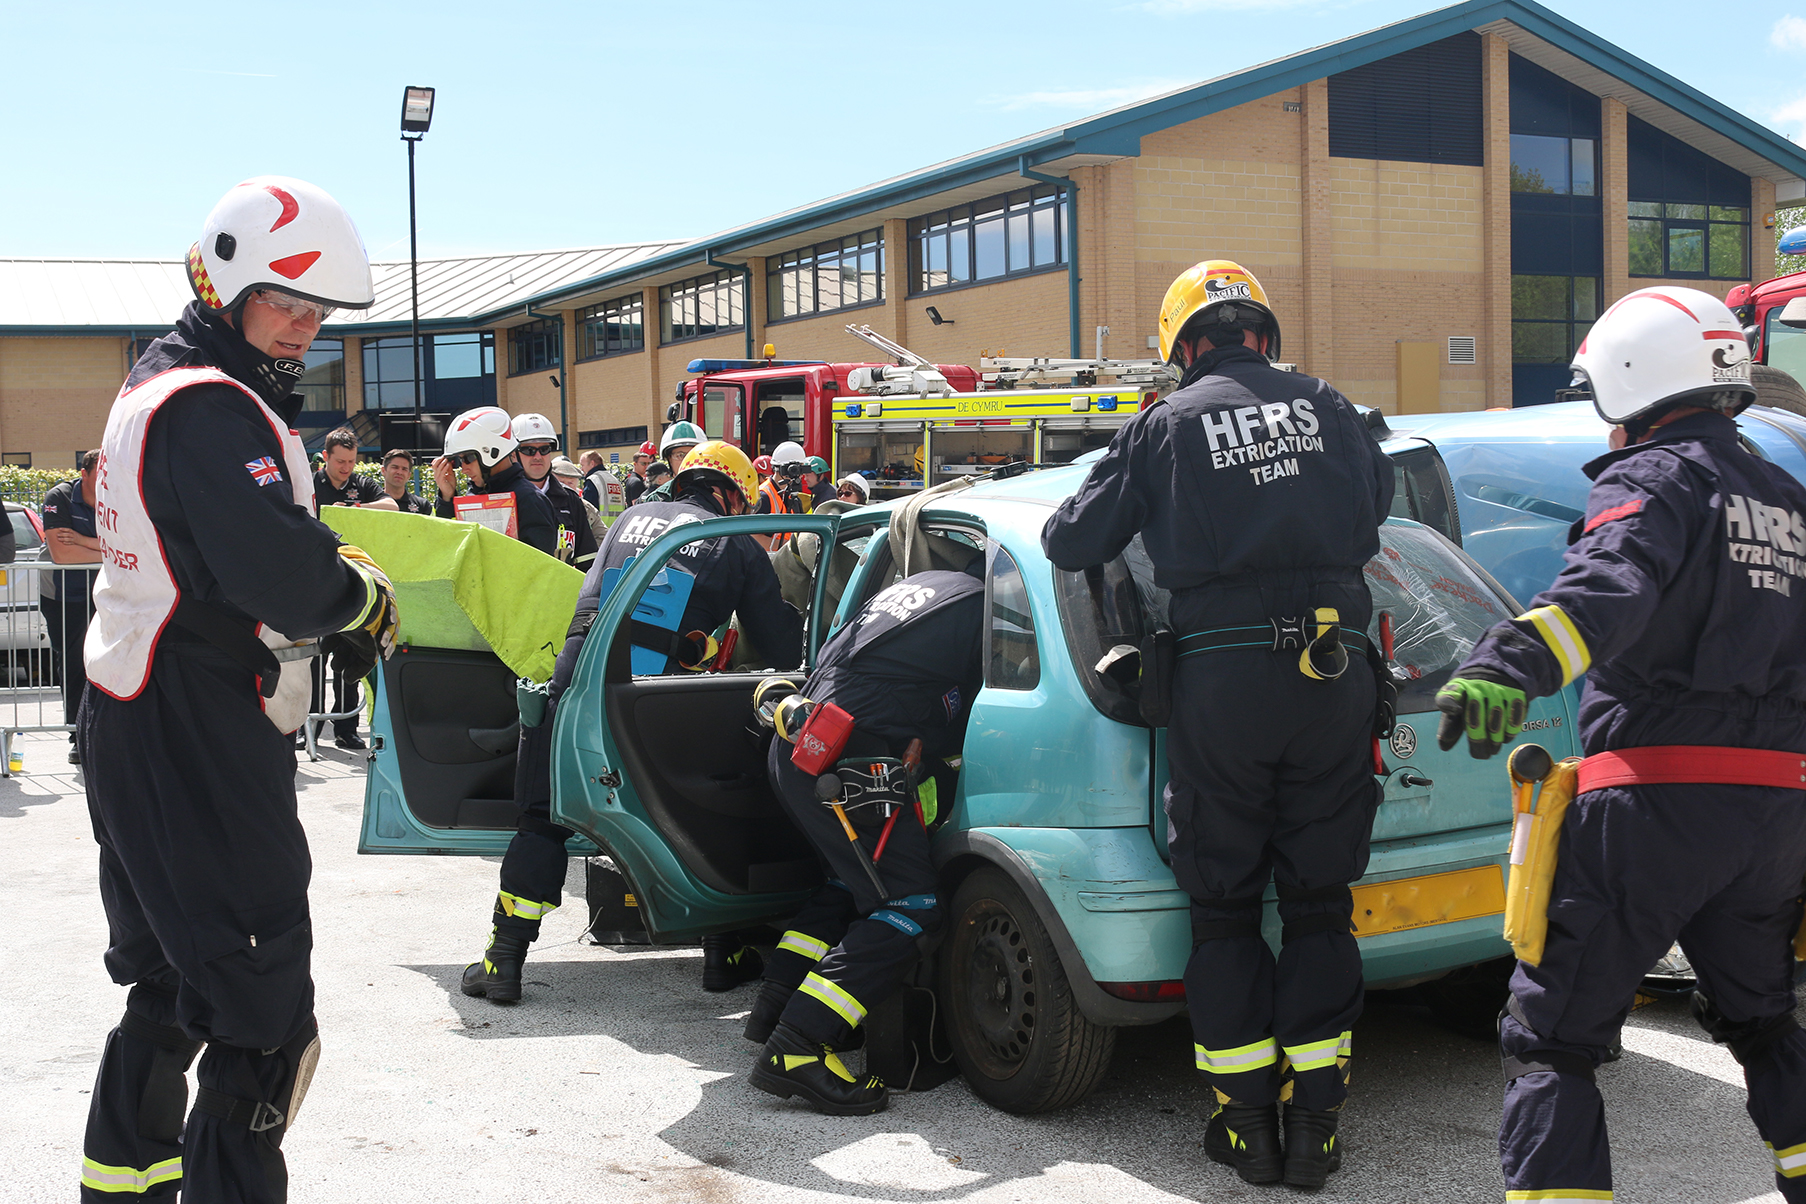 Photo of the extrication challenge